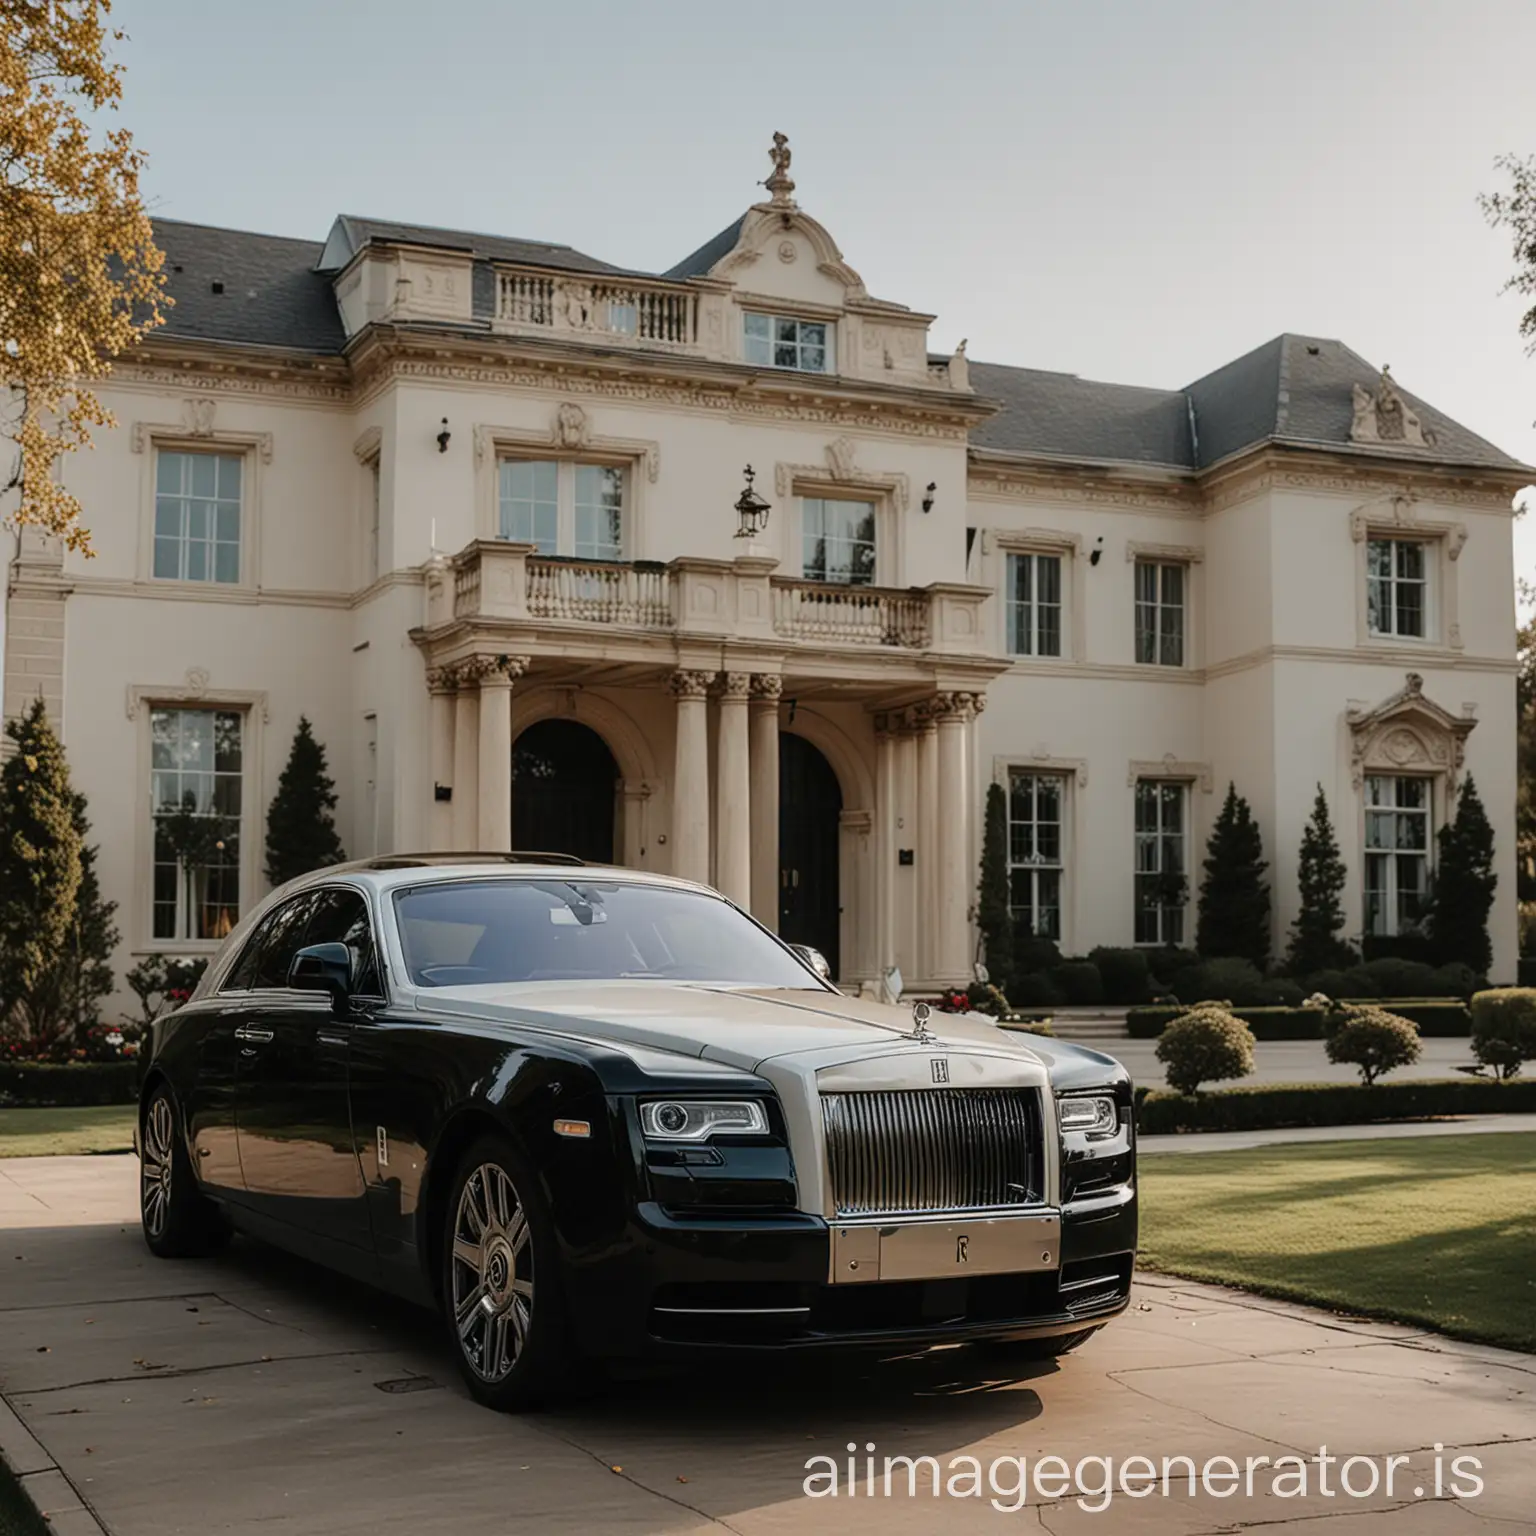 Rolls royce parked in front of luxury mansion